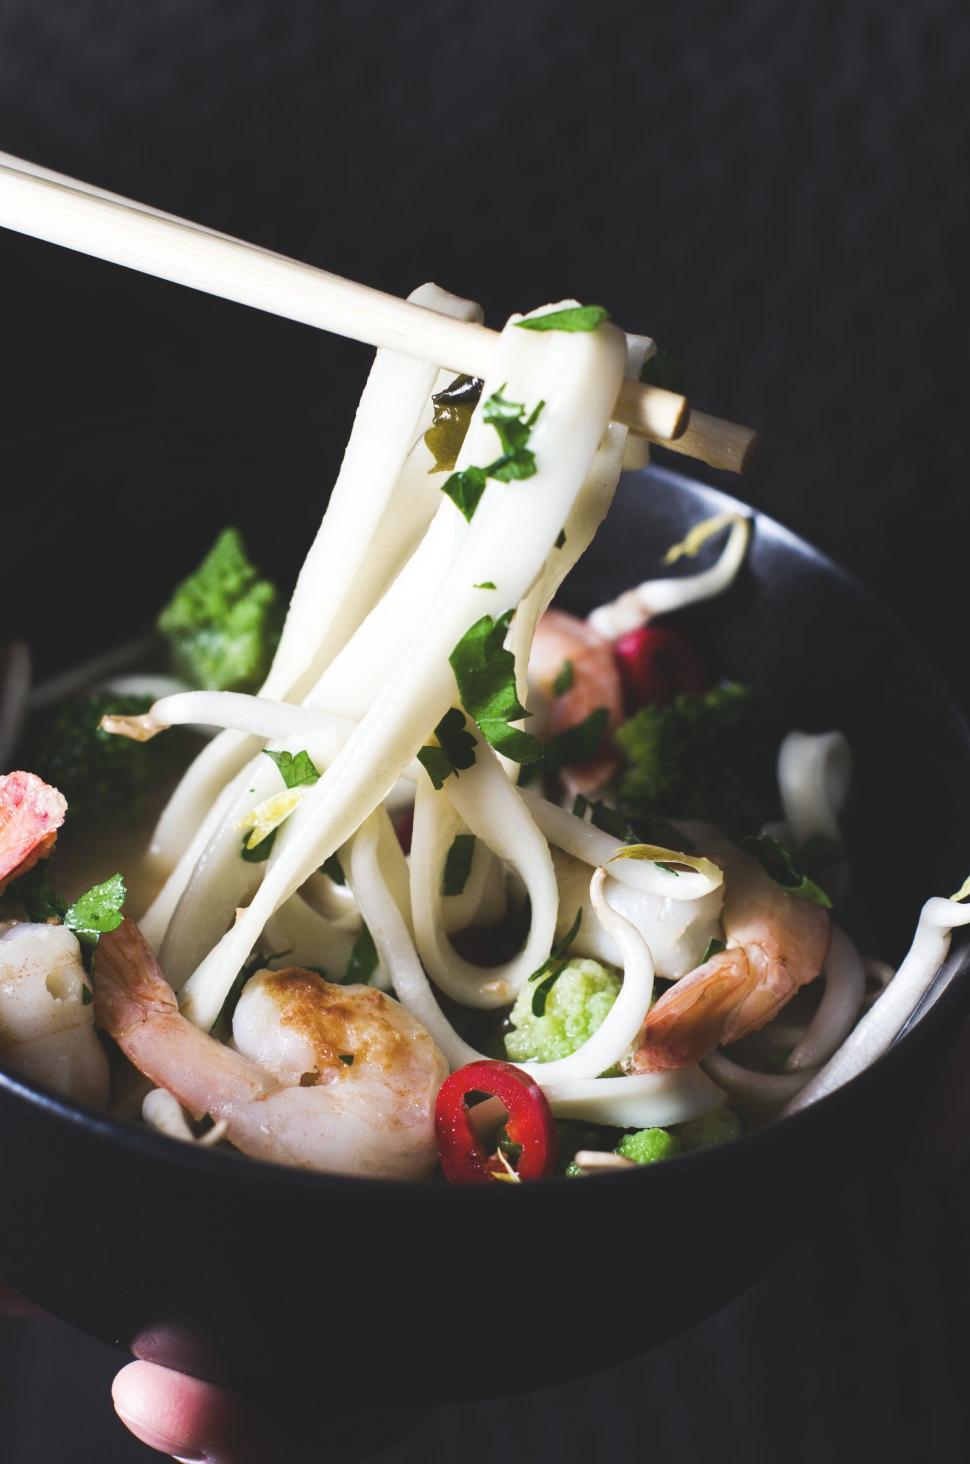 Free Image of A bowl of noodles with shrimp and vegetables 